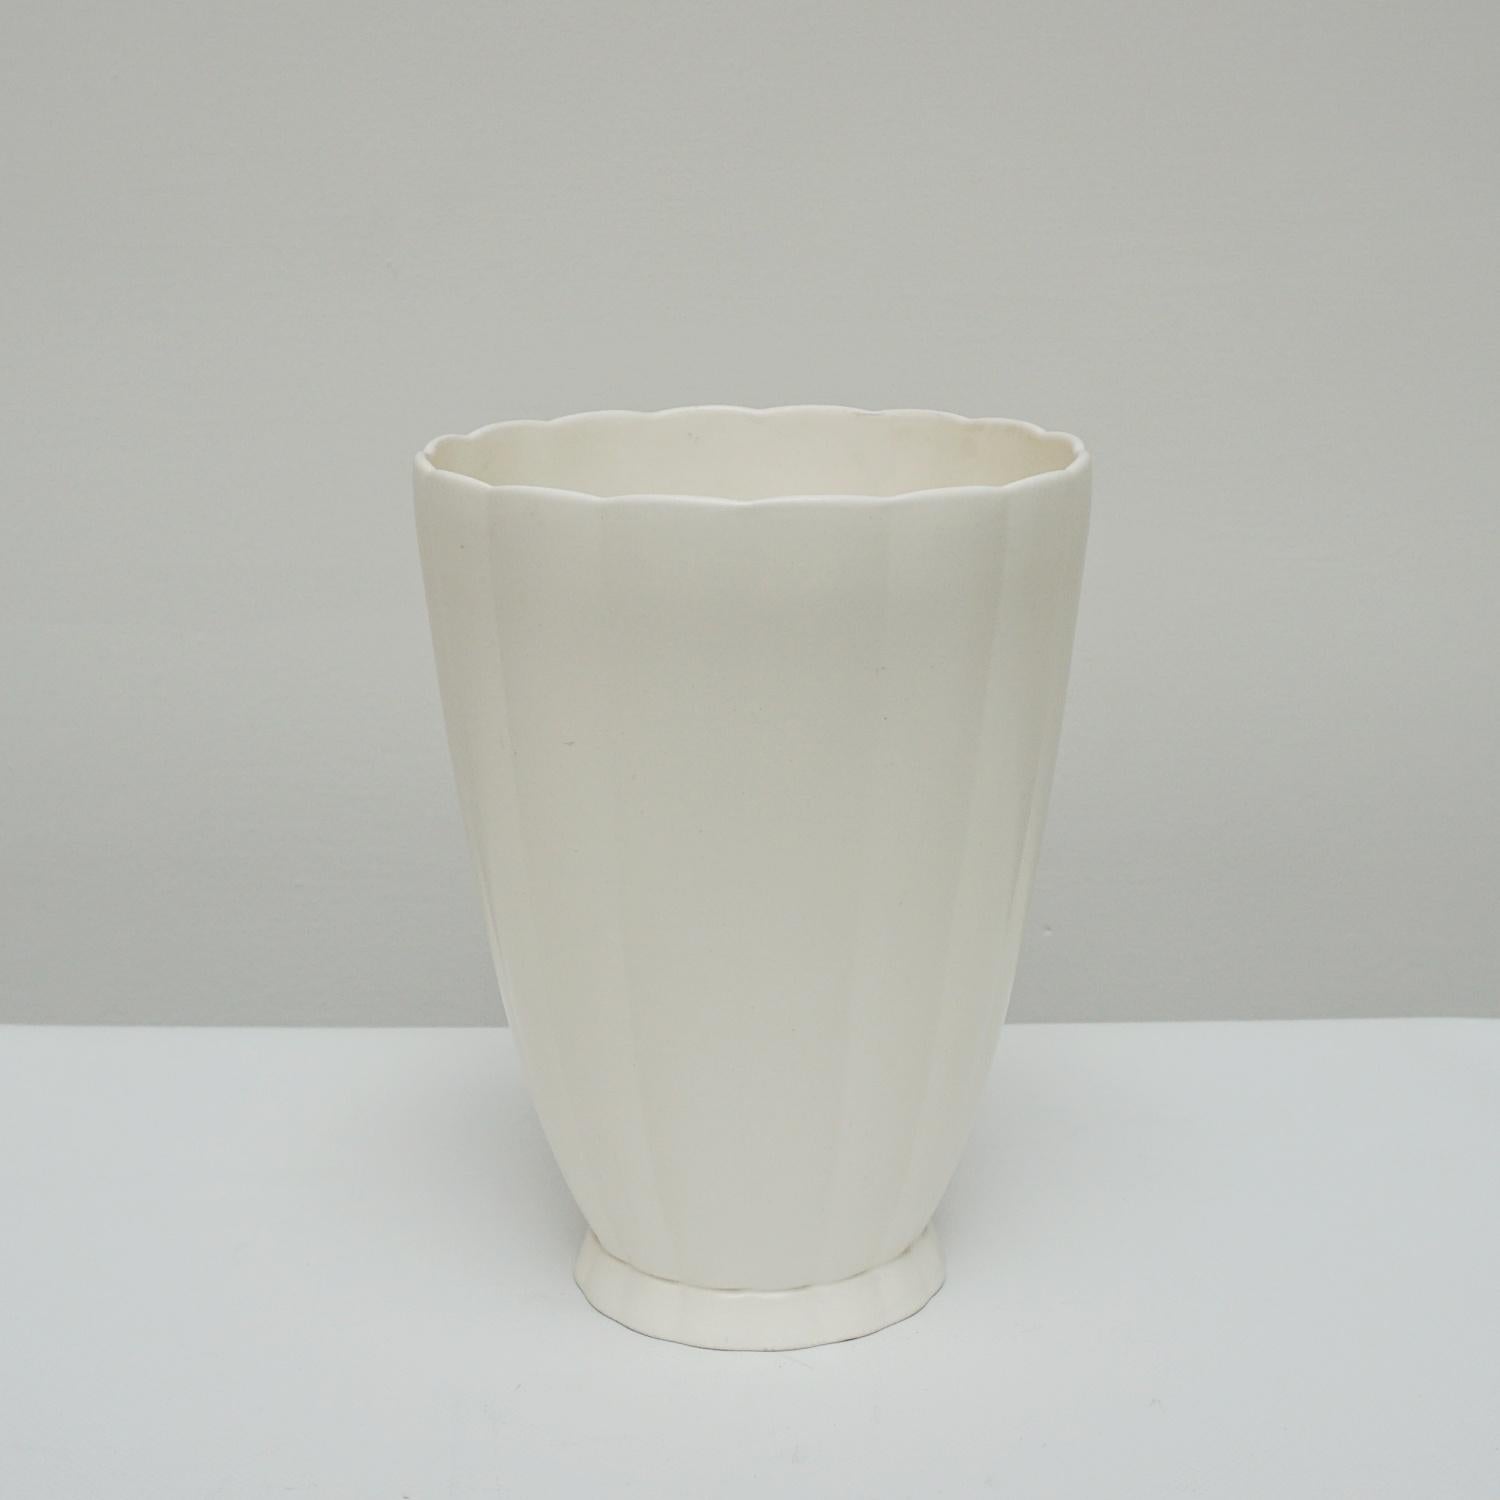 An Art Deco cream earthenware vase. Designed by K.Murray for Wedgwood. Stamped to base.

Origin: English

Date: Circa 1935